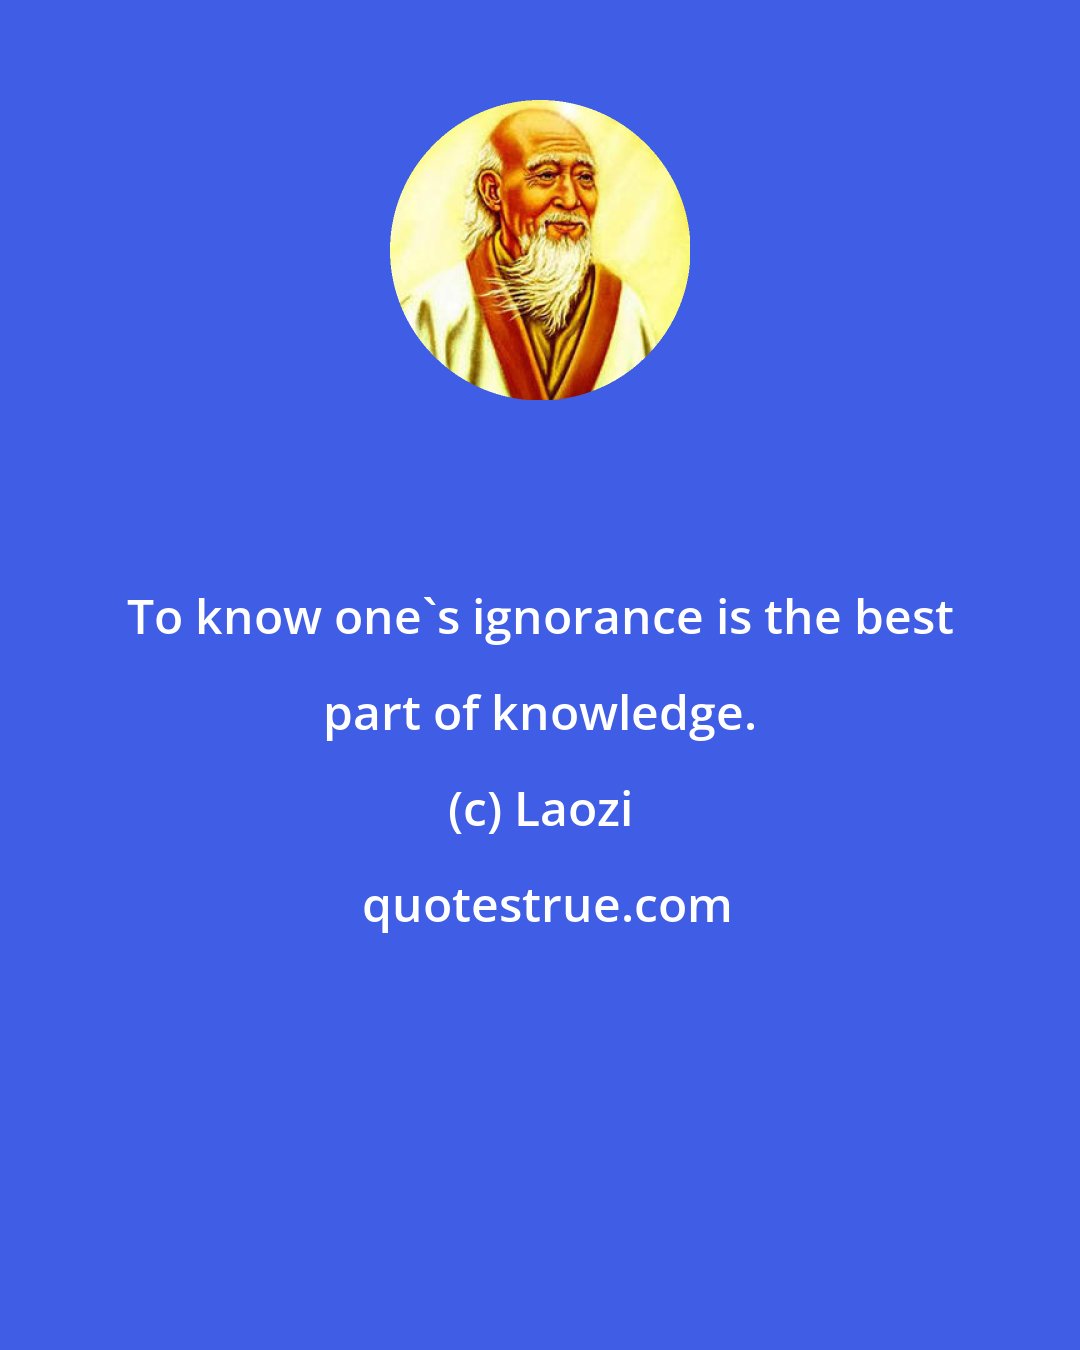 Laozi: To know one's ignorance is the best part of knowledge.